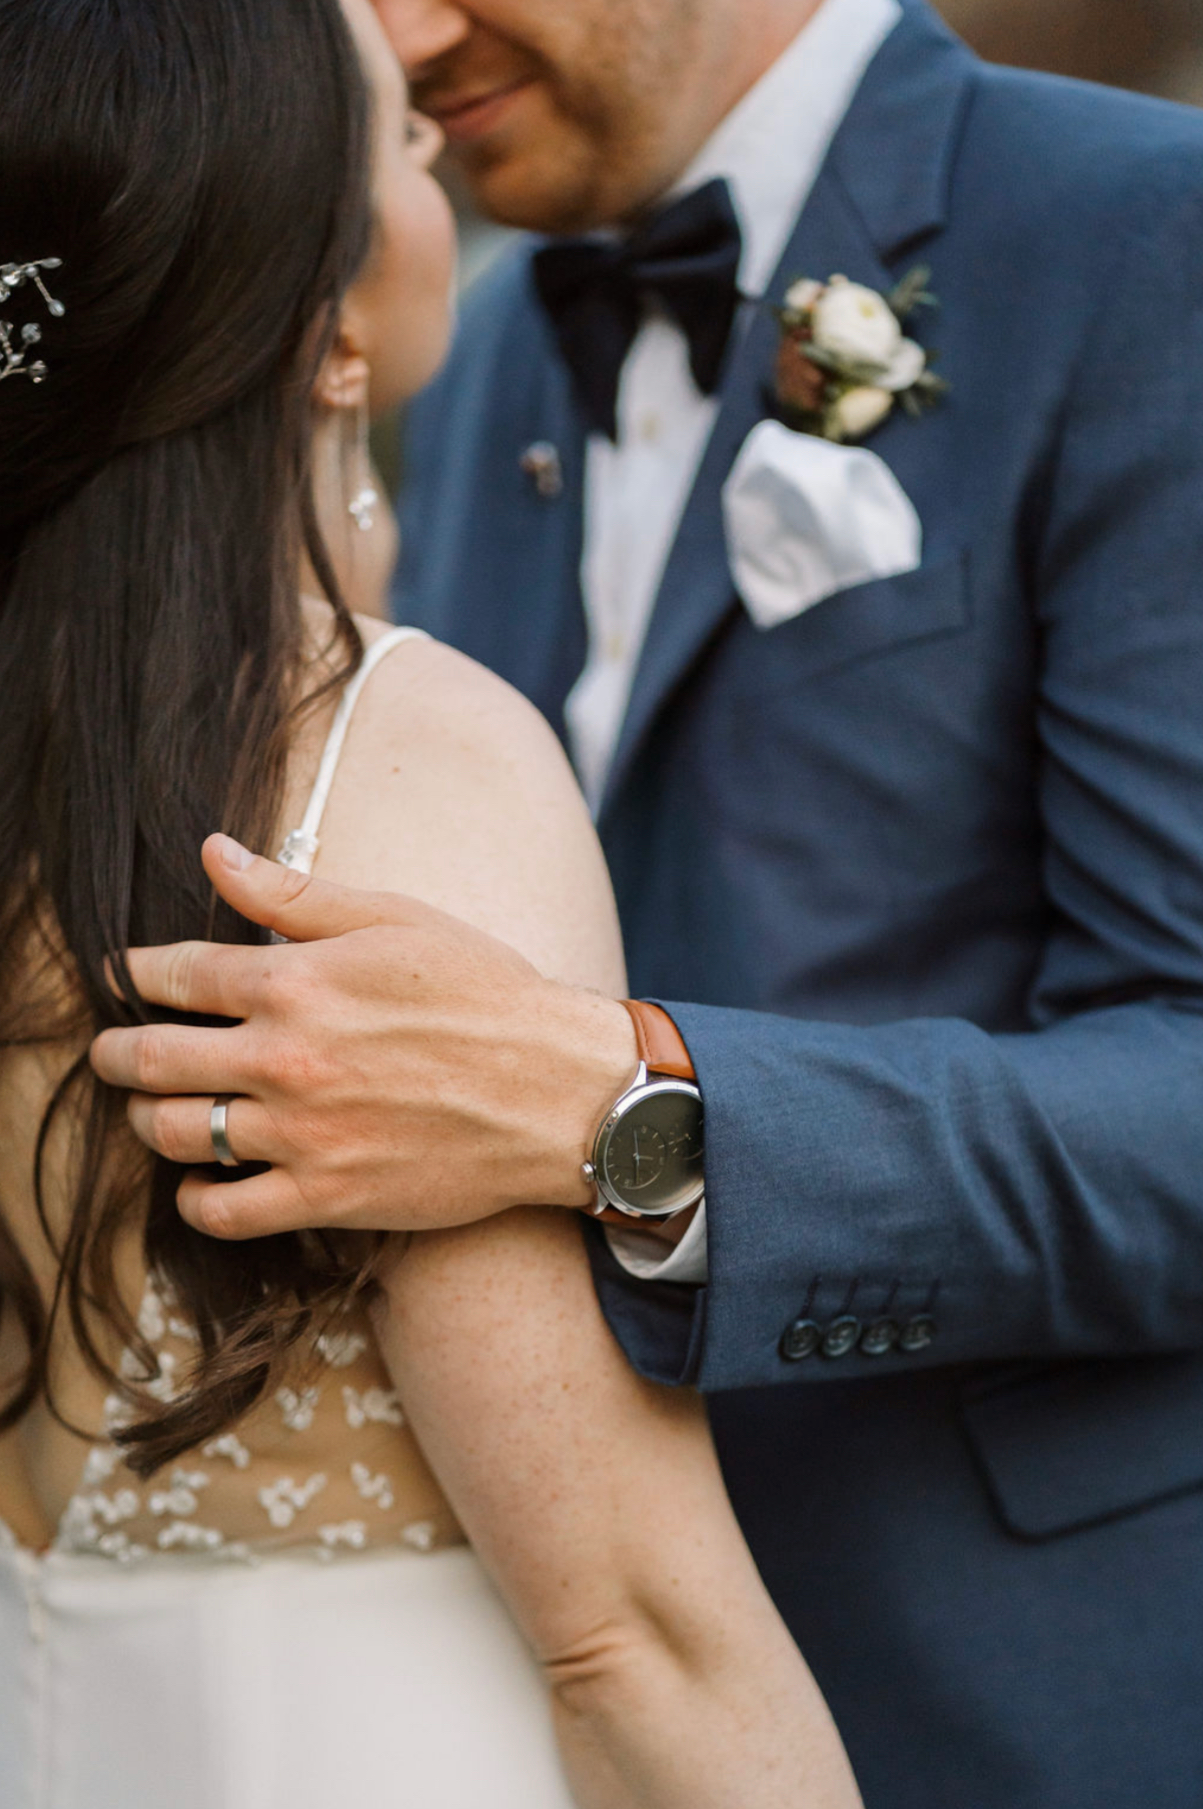 Couple on wedding day with husband’s gold wedding ring and watch 